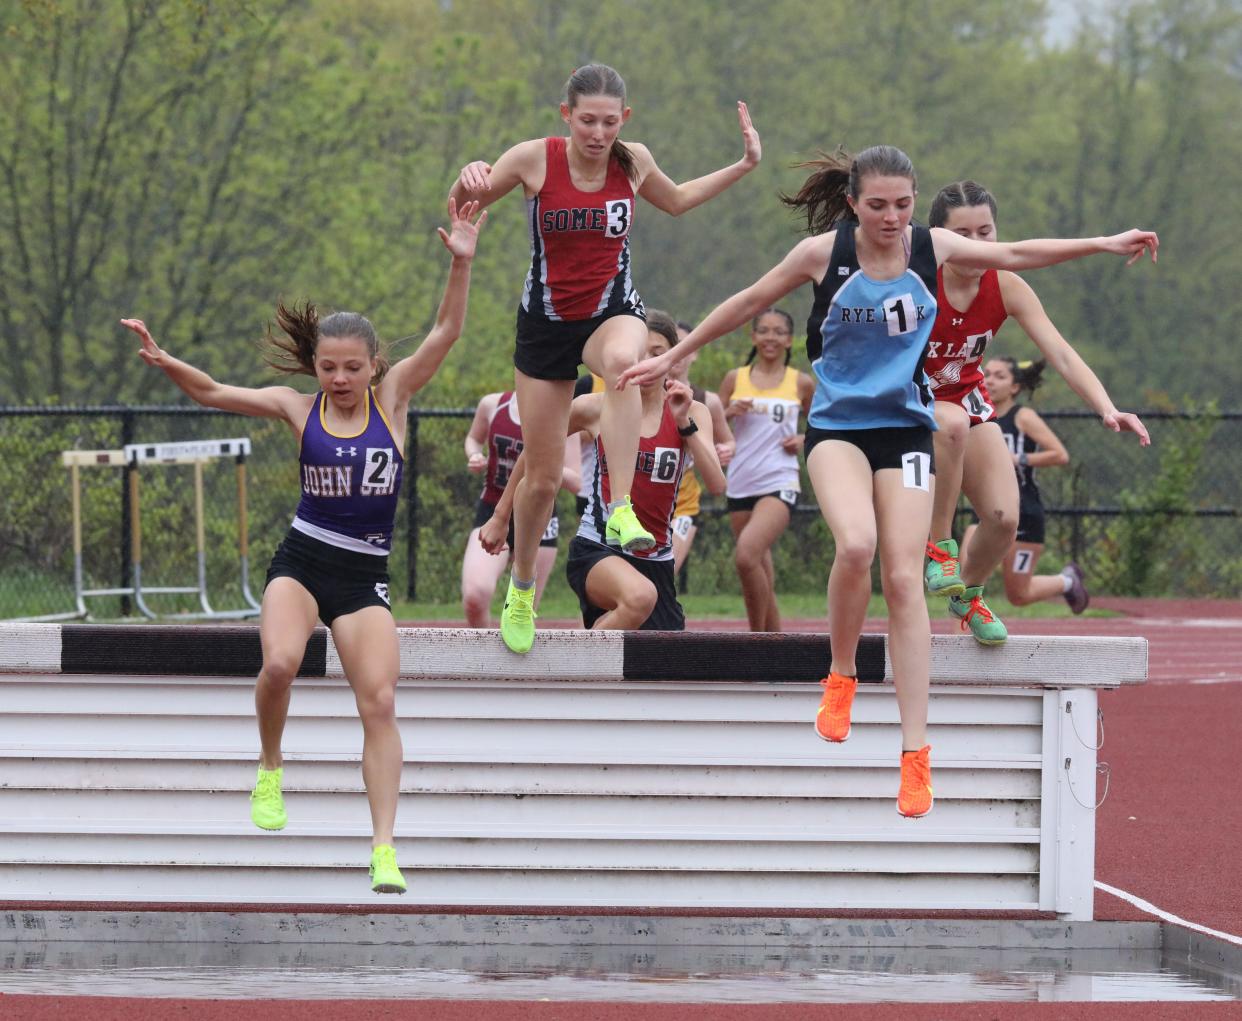 Sloane Wasserman from John Jay (Cross River), left, placed first as athletes compete in the girls 2000 Meter Steeplechase during the Gold Rush Invitational Track & Field meet at Clarkstown South High School in West Nyack, April 29, 2023. 